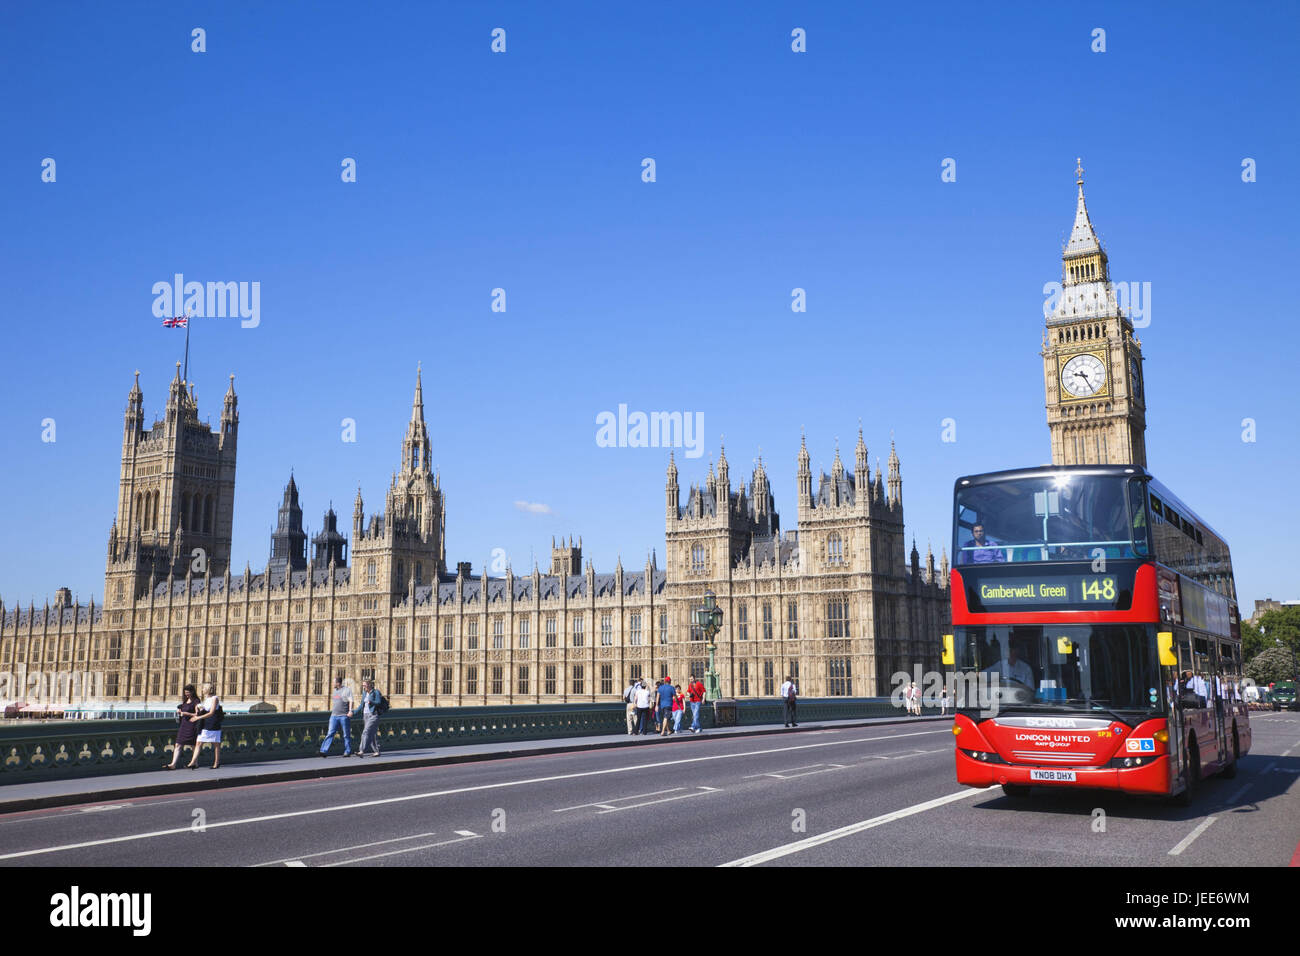 England, London, Westminster, Palace of Westminster, Big Ben, double-decker bus, town, parliament, architecture, building, structure, landmark, monument, bus, red, tourism, person, bridge, world cultural heritage, street, Stock Photo